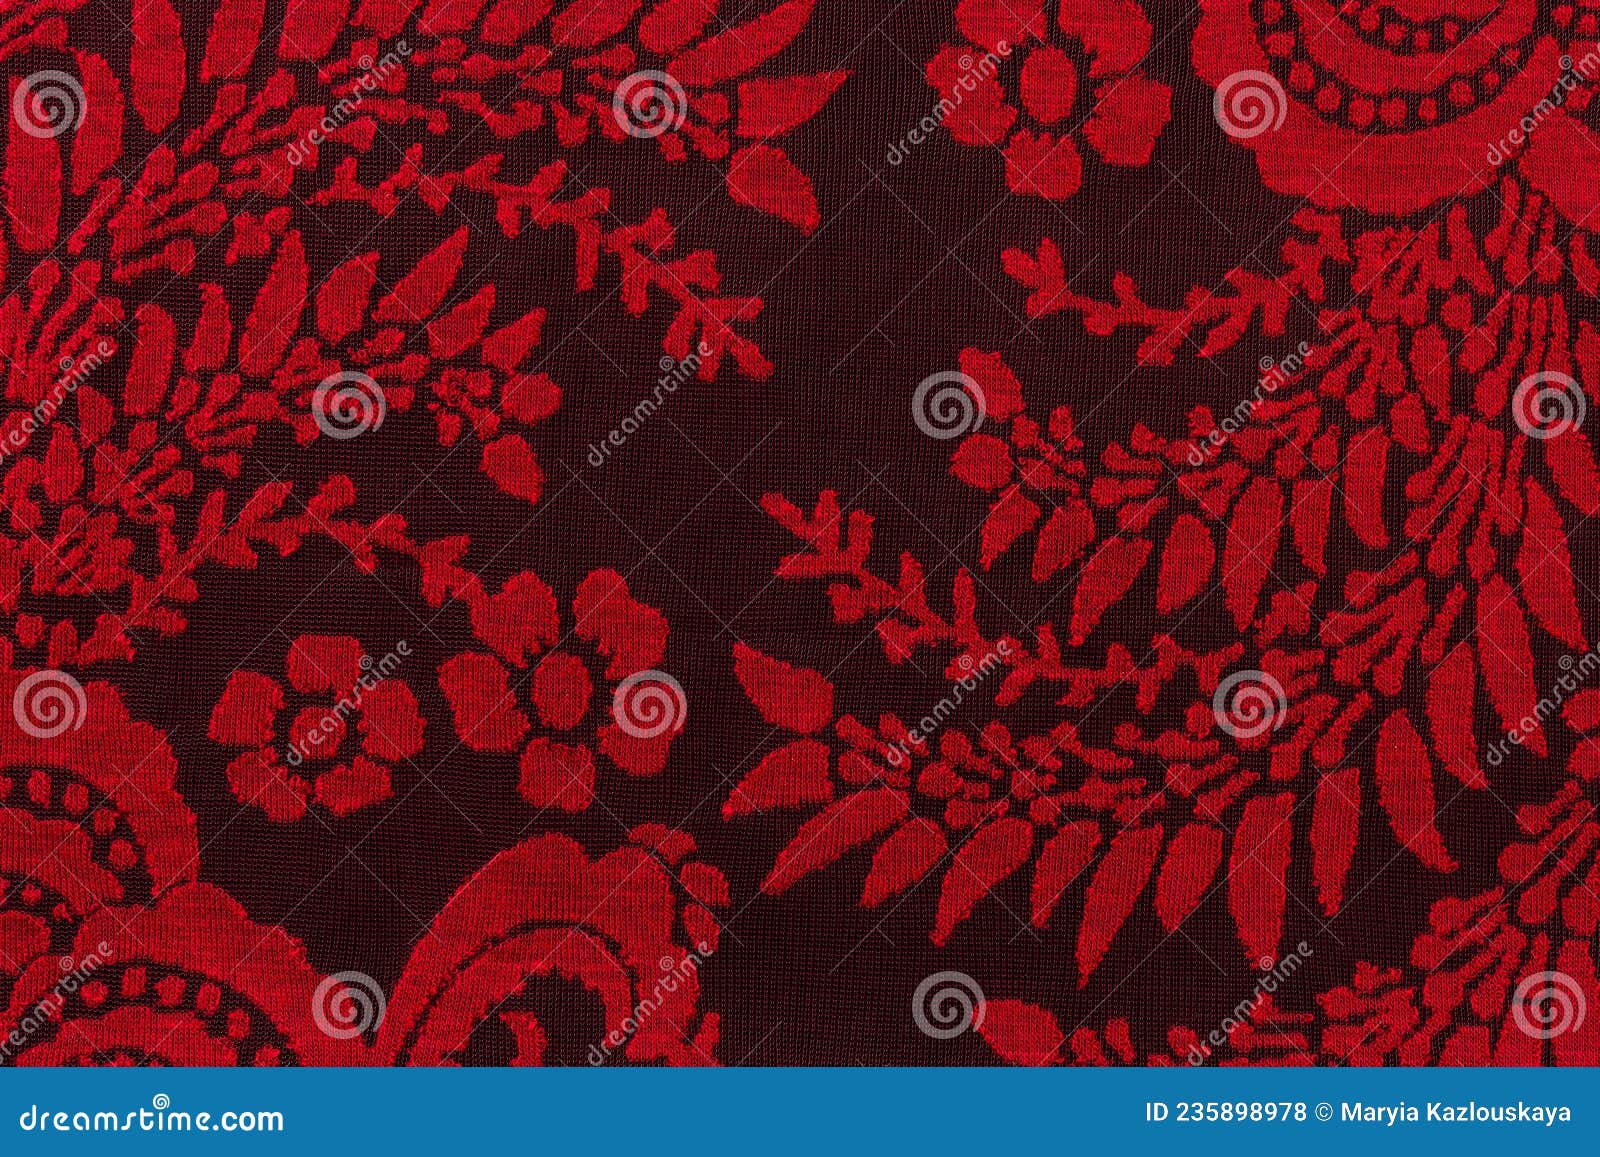 Red Lace Fabric with Floral Pattern Against Black Bacground. Texture of  Embroidery Red Guipure Stock Photo - Image of elegant, closeup: 235898978